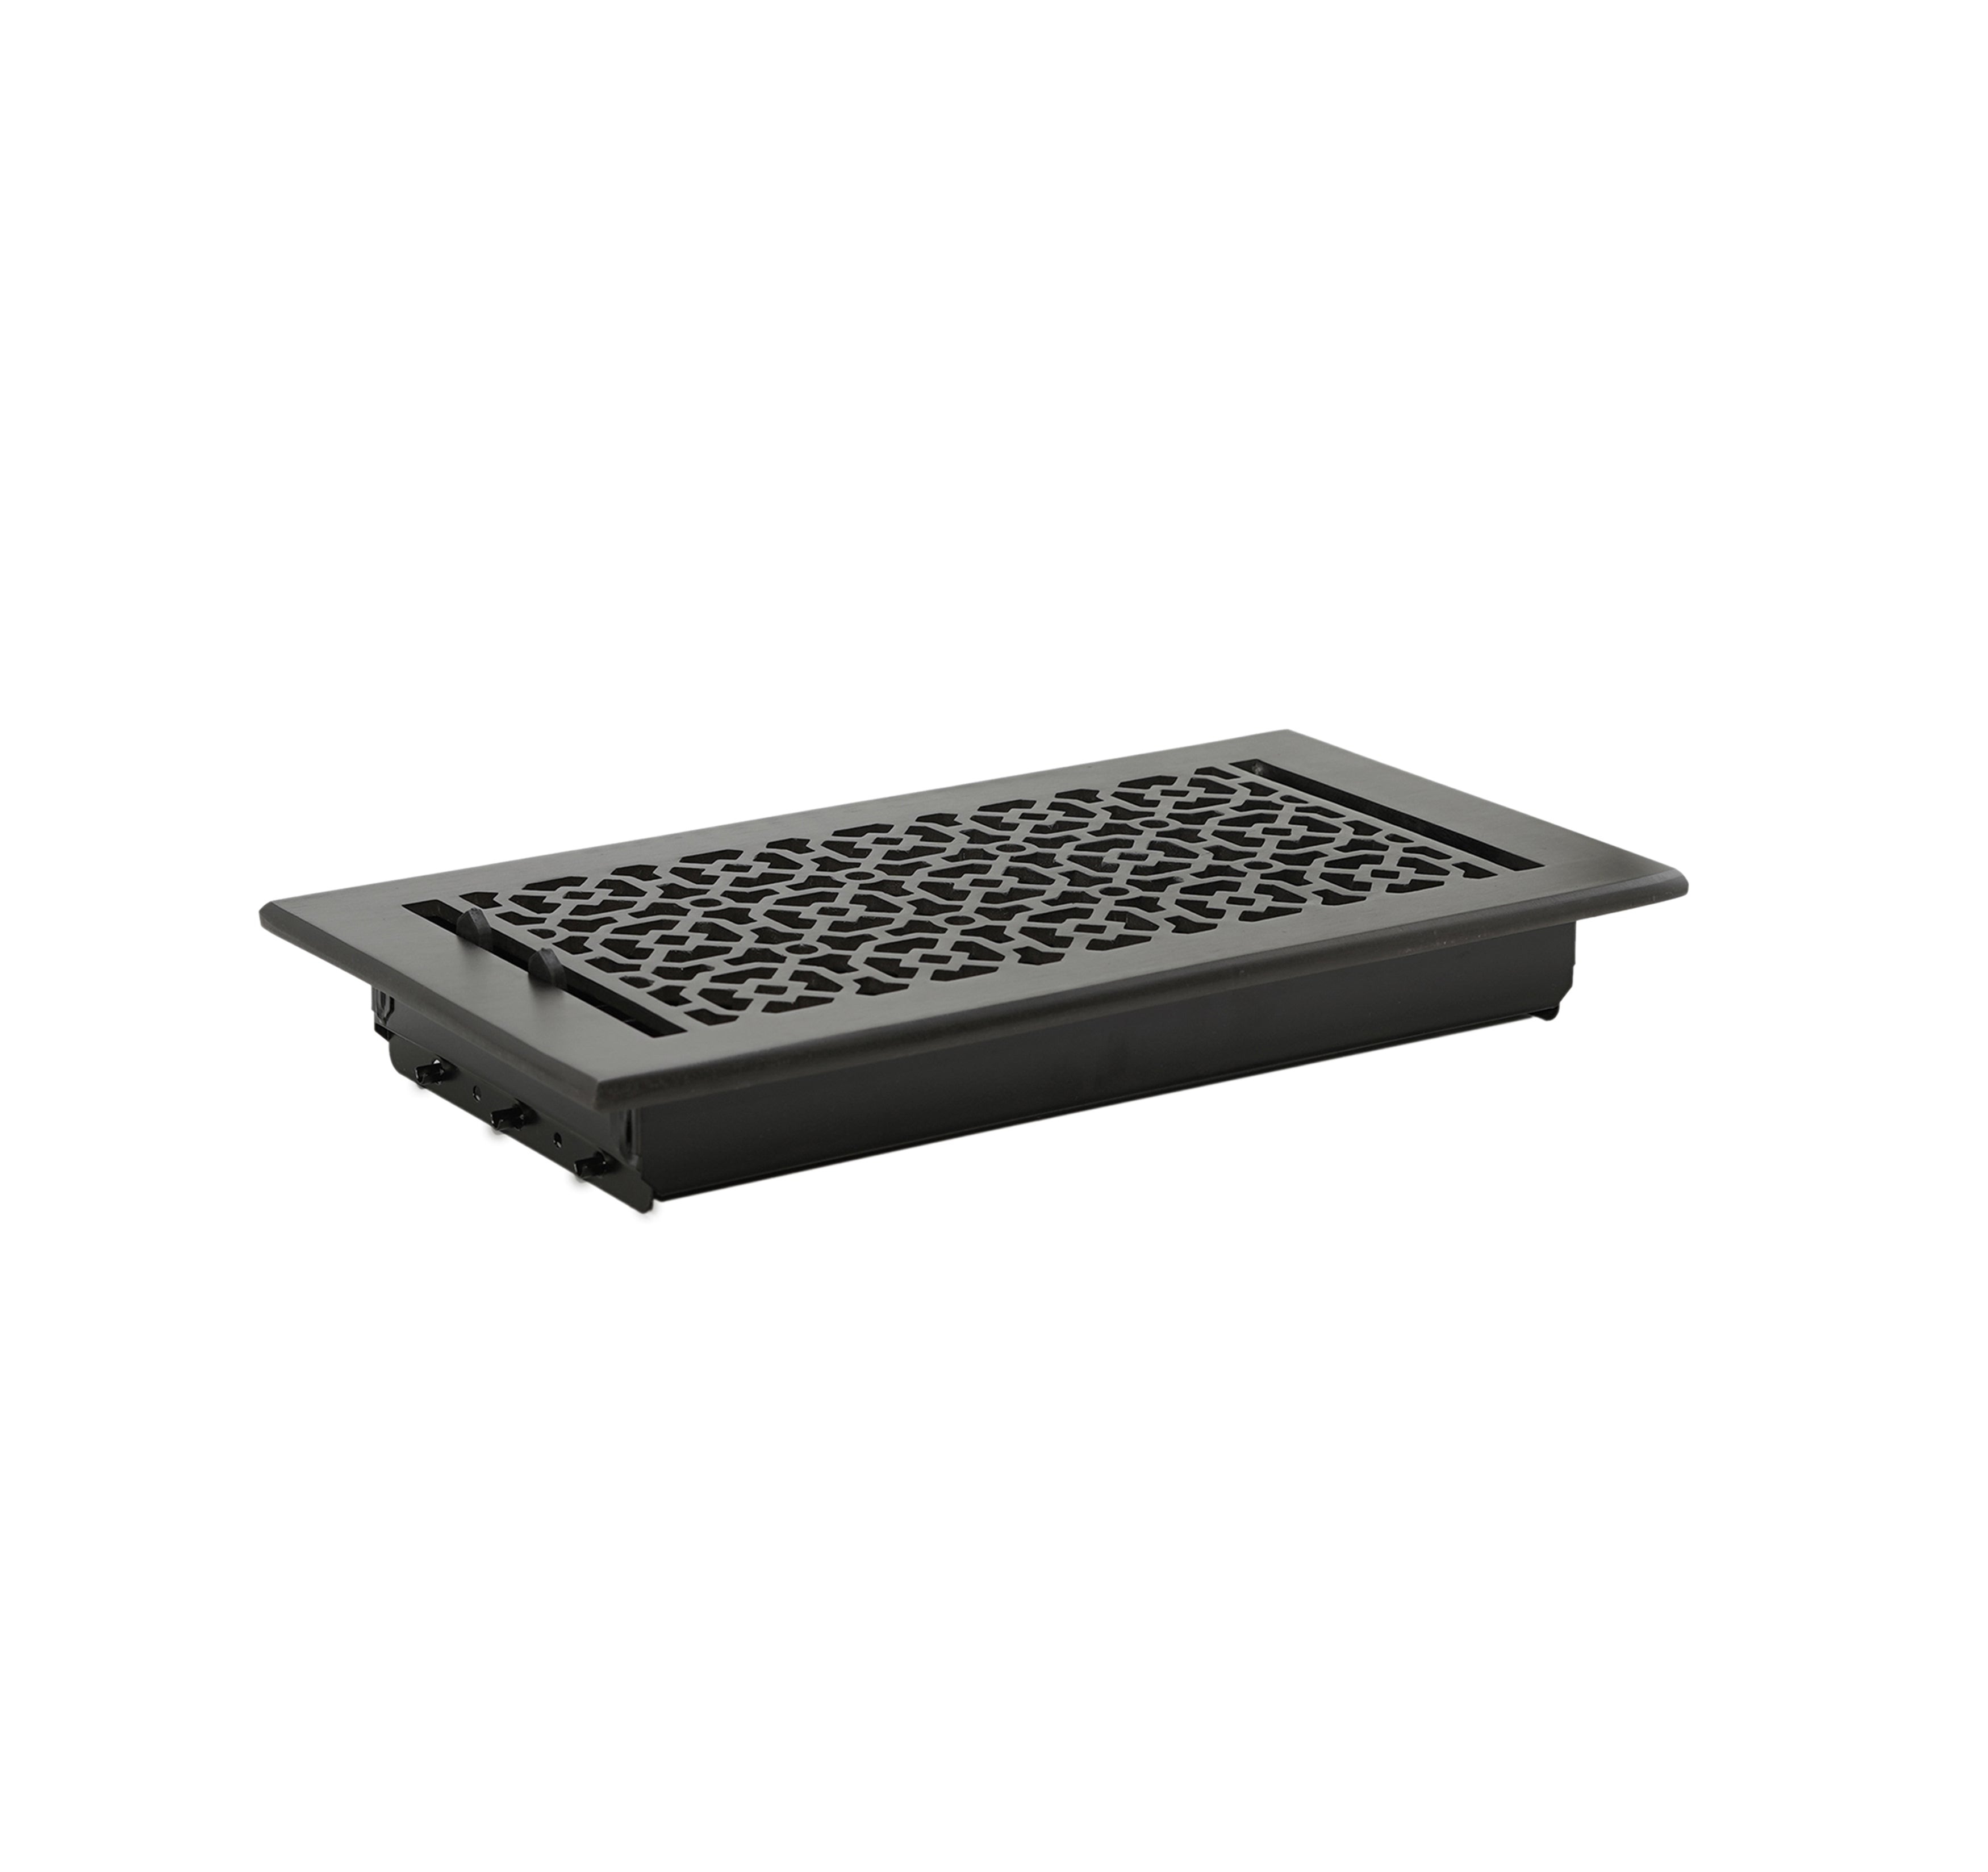 Achtek Air Supply Vent 6"x 12" Duct Opening (Overall 7-1/2"x 13-3/4") Solid Cast Aluminium Register Cover | Powder Coated